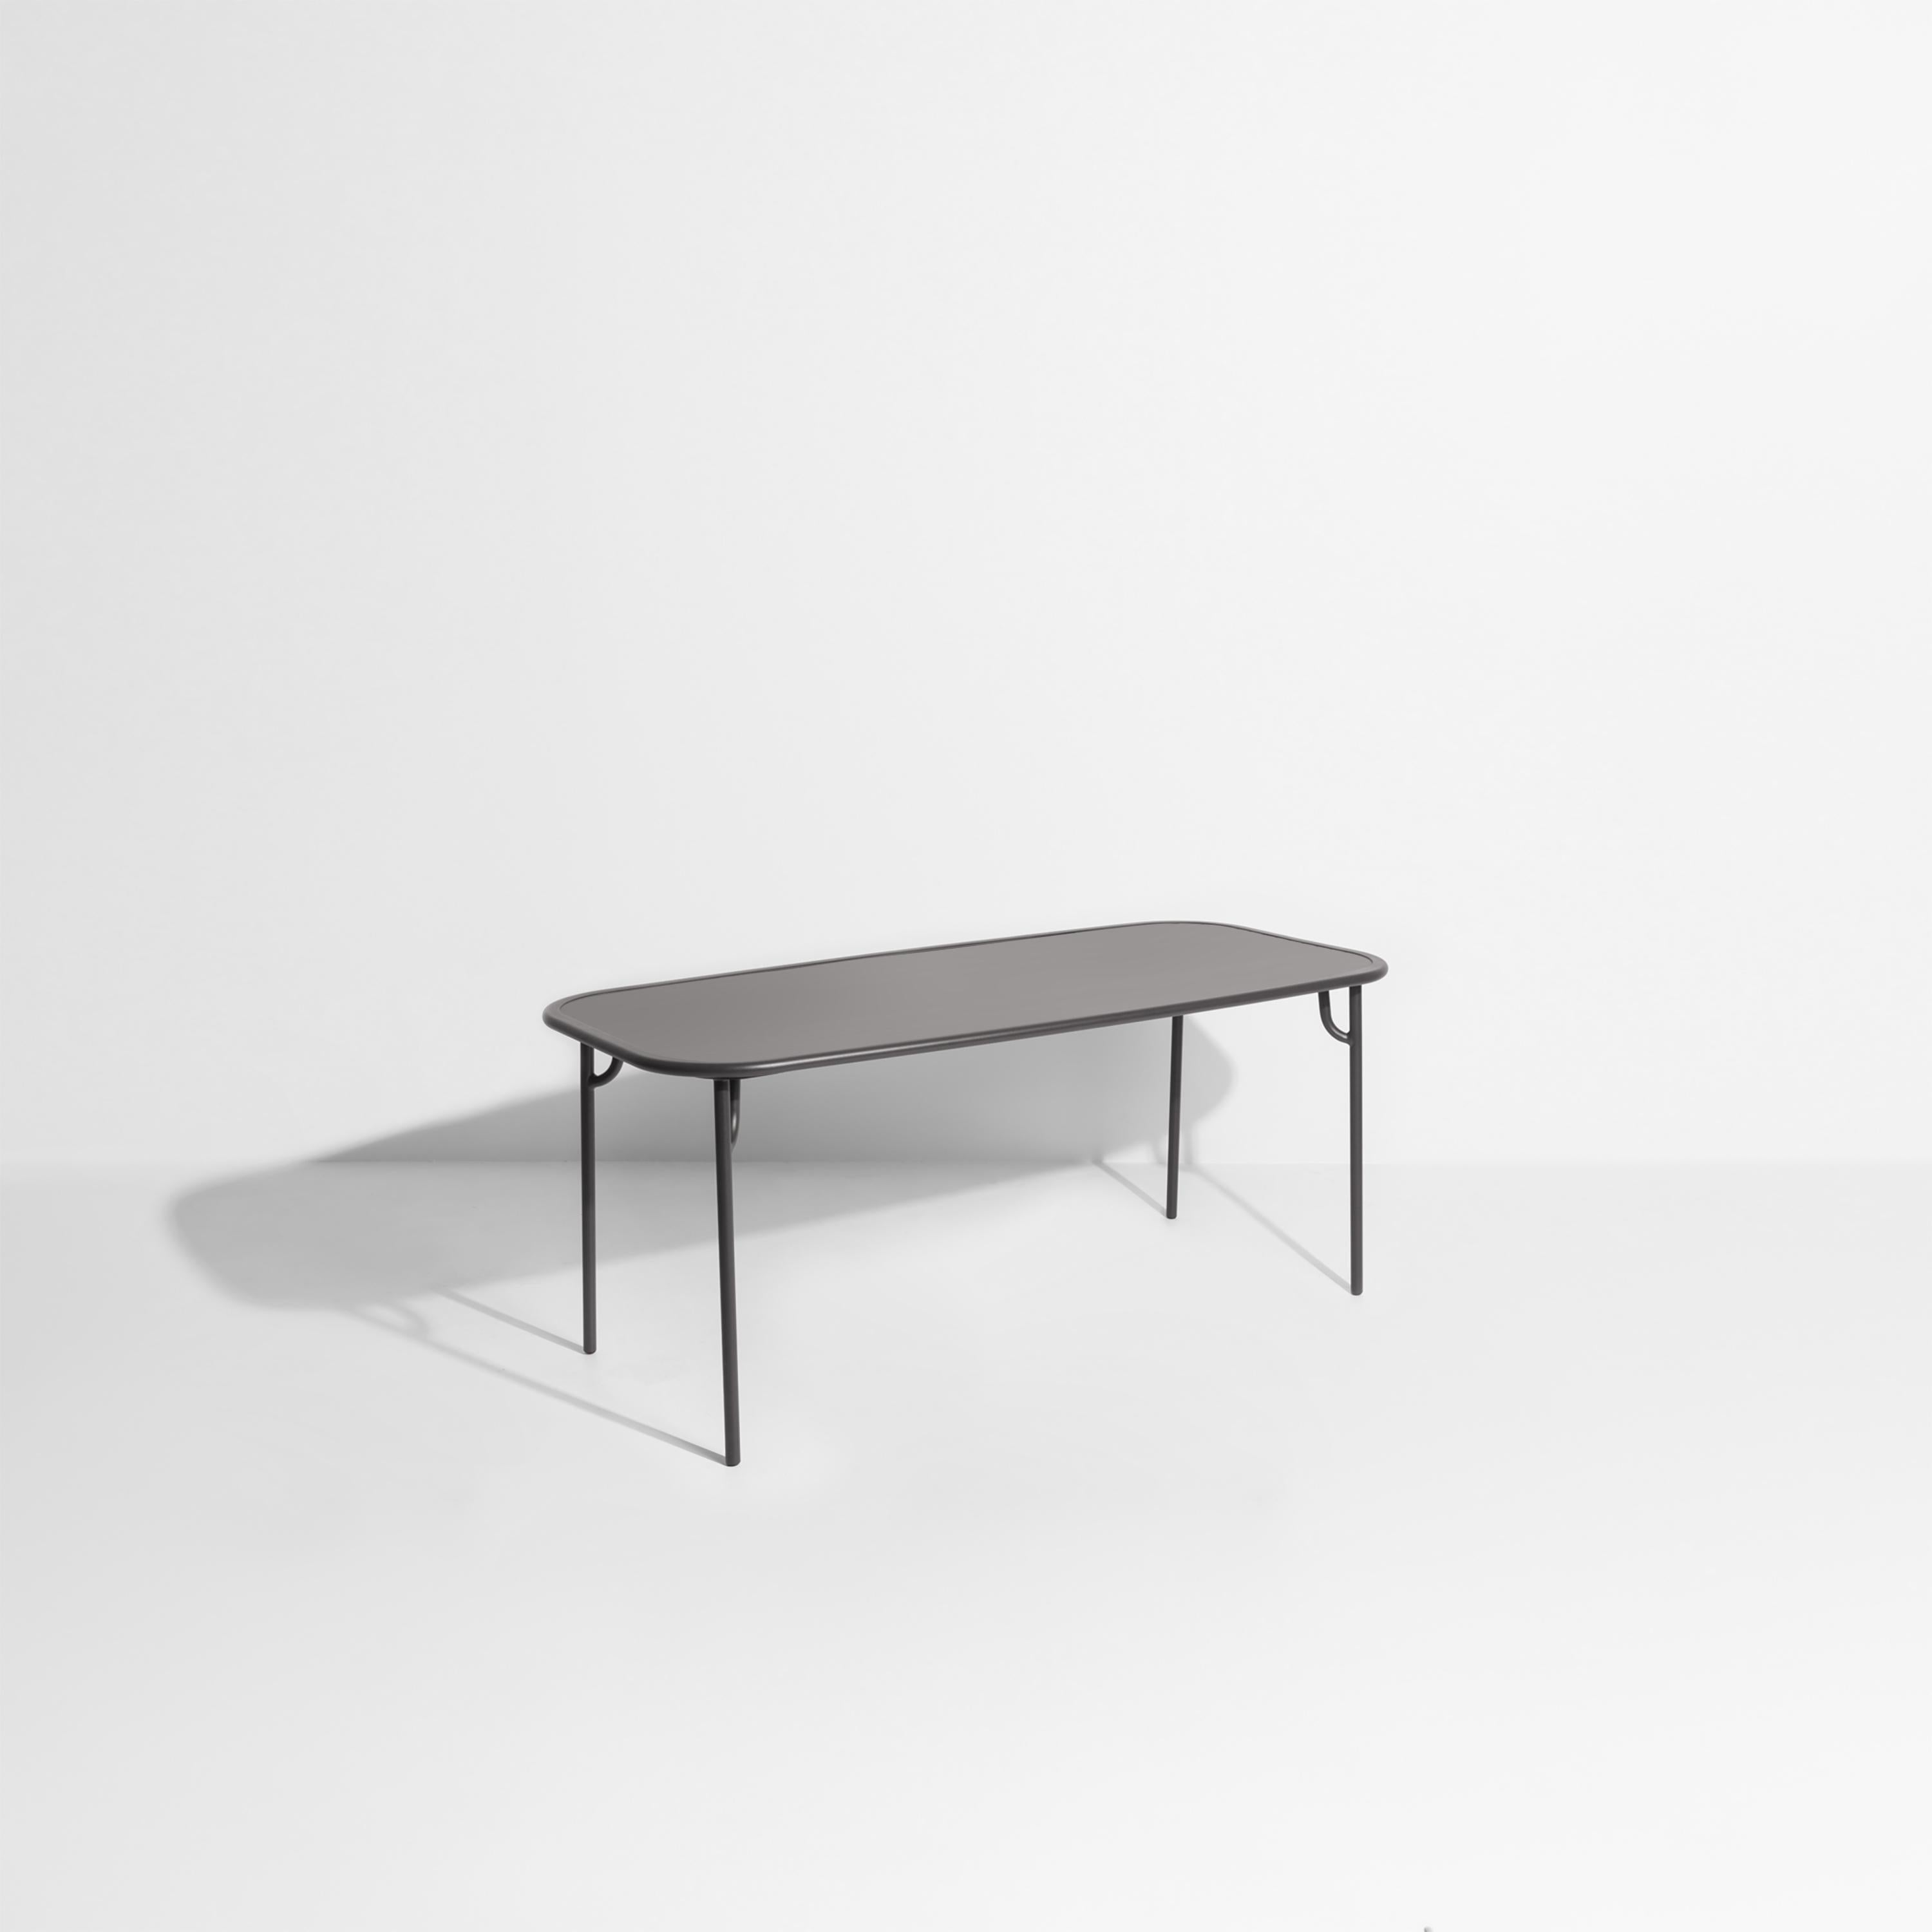 Petite Friture Week-End Medium Plain Rectangular Dining Table in Anthracite Aluminium by Studio BrichetZiegler, 2017

The week-end collection is a full range of outdoor furniture, in aluminium grained epoxy paint, matt finish, that includes 18